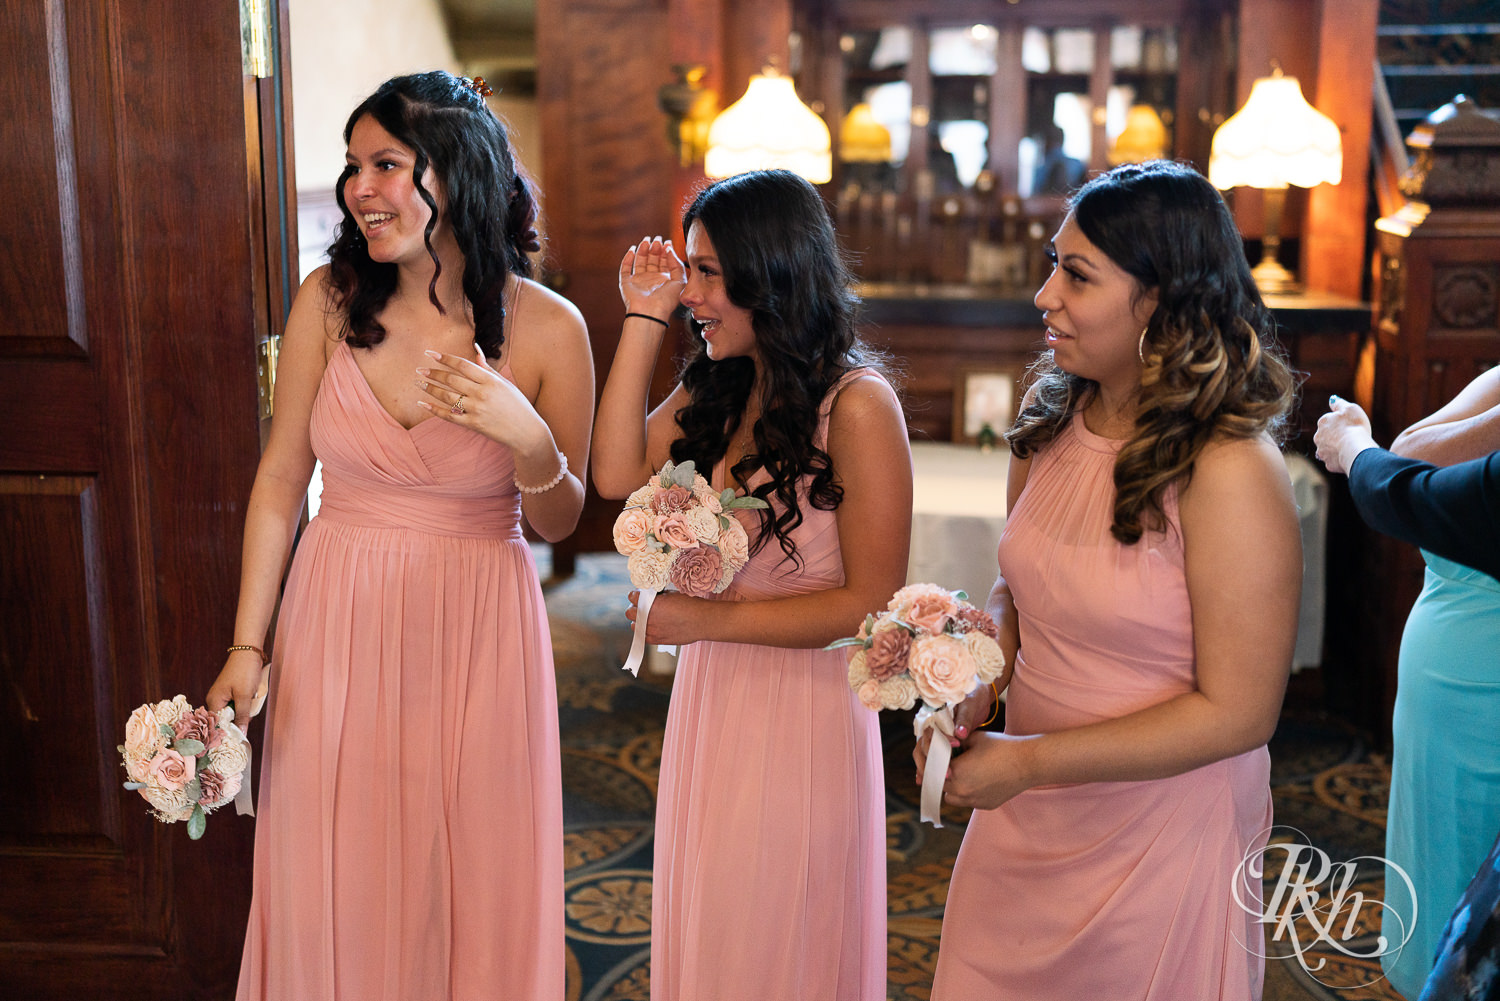 Bridesmaids crying after wedding ceremony at the Historic Concord Exchange in Saint Paul, Minnesota.